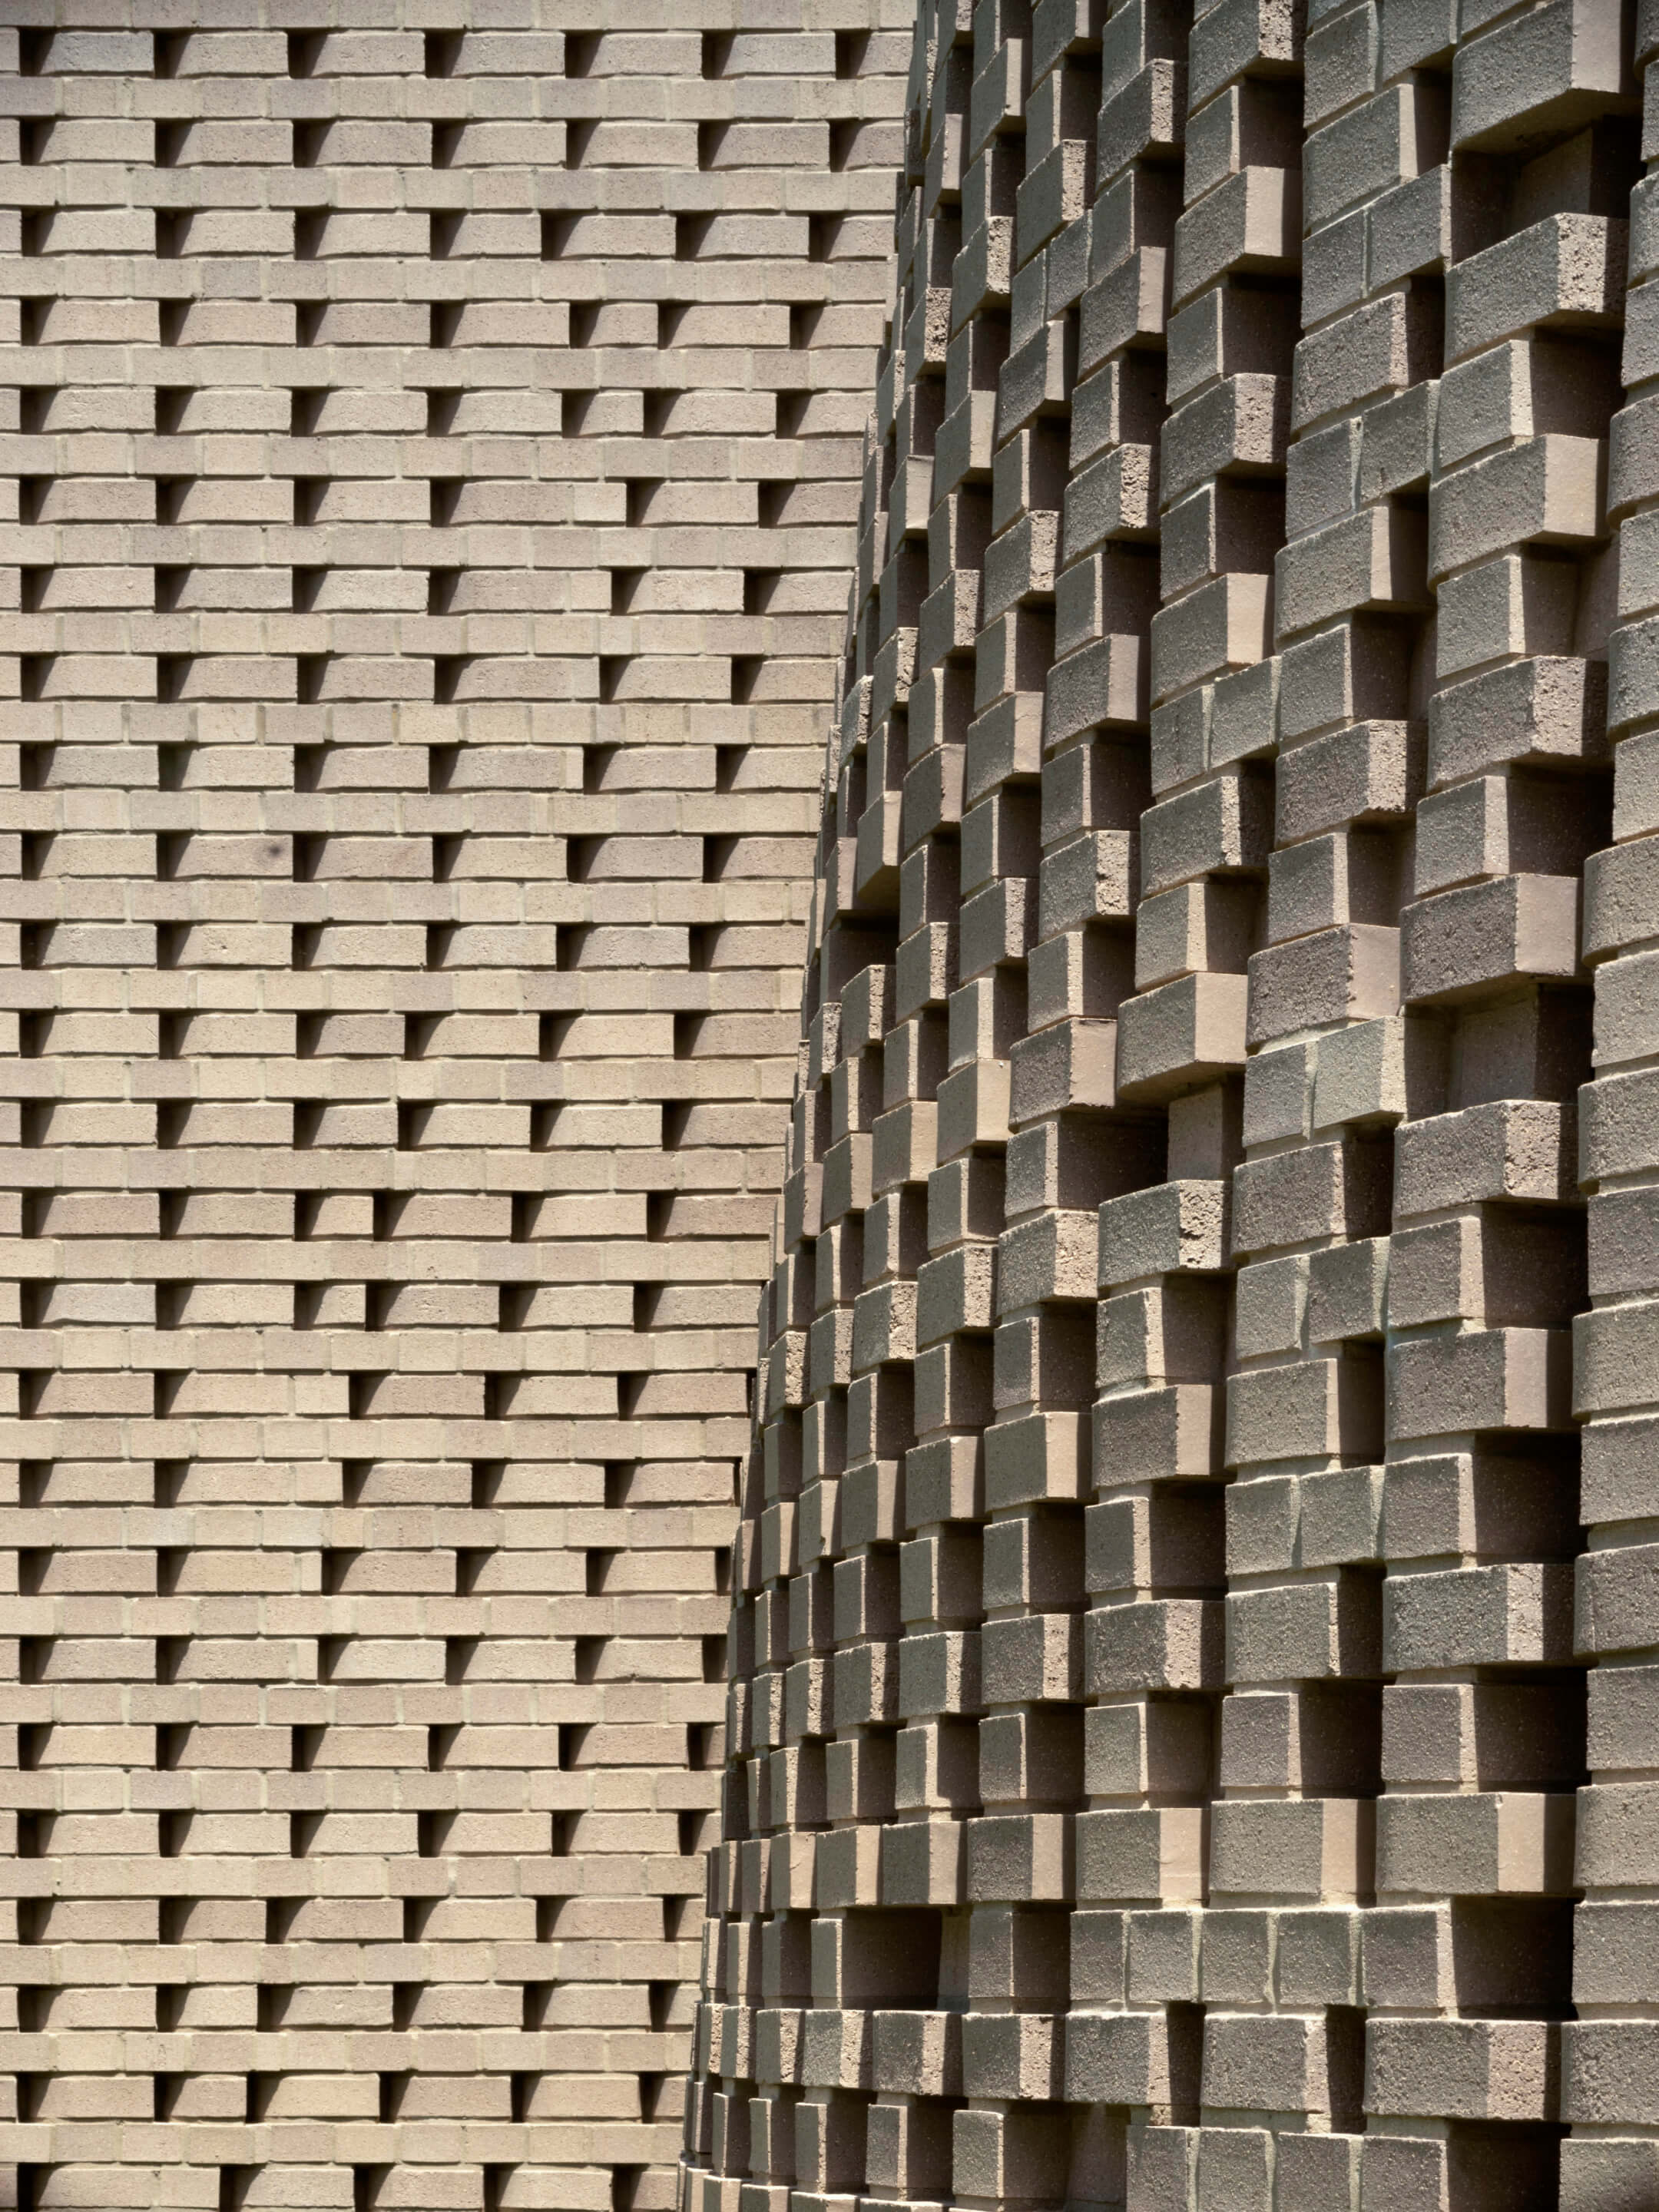 Cascading brick facade that will be on display at the upcoming philadelphia conference